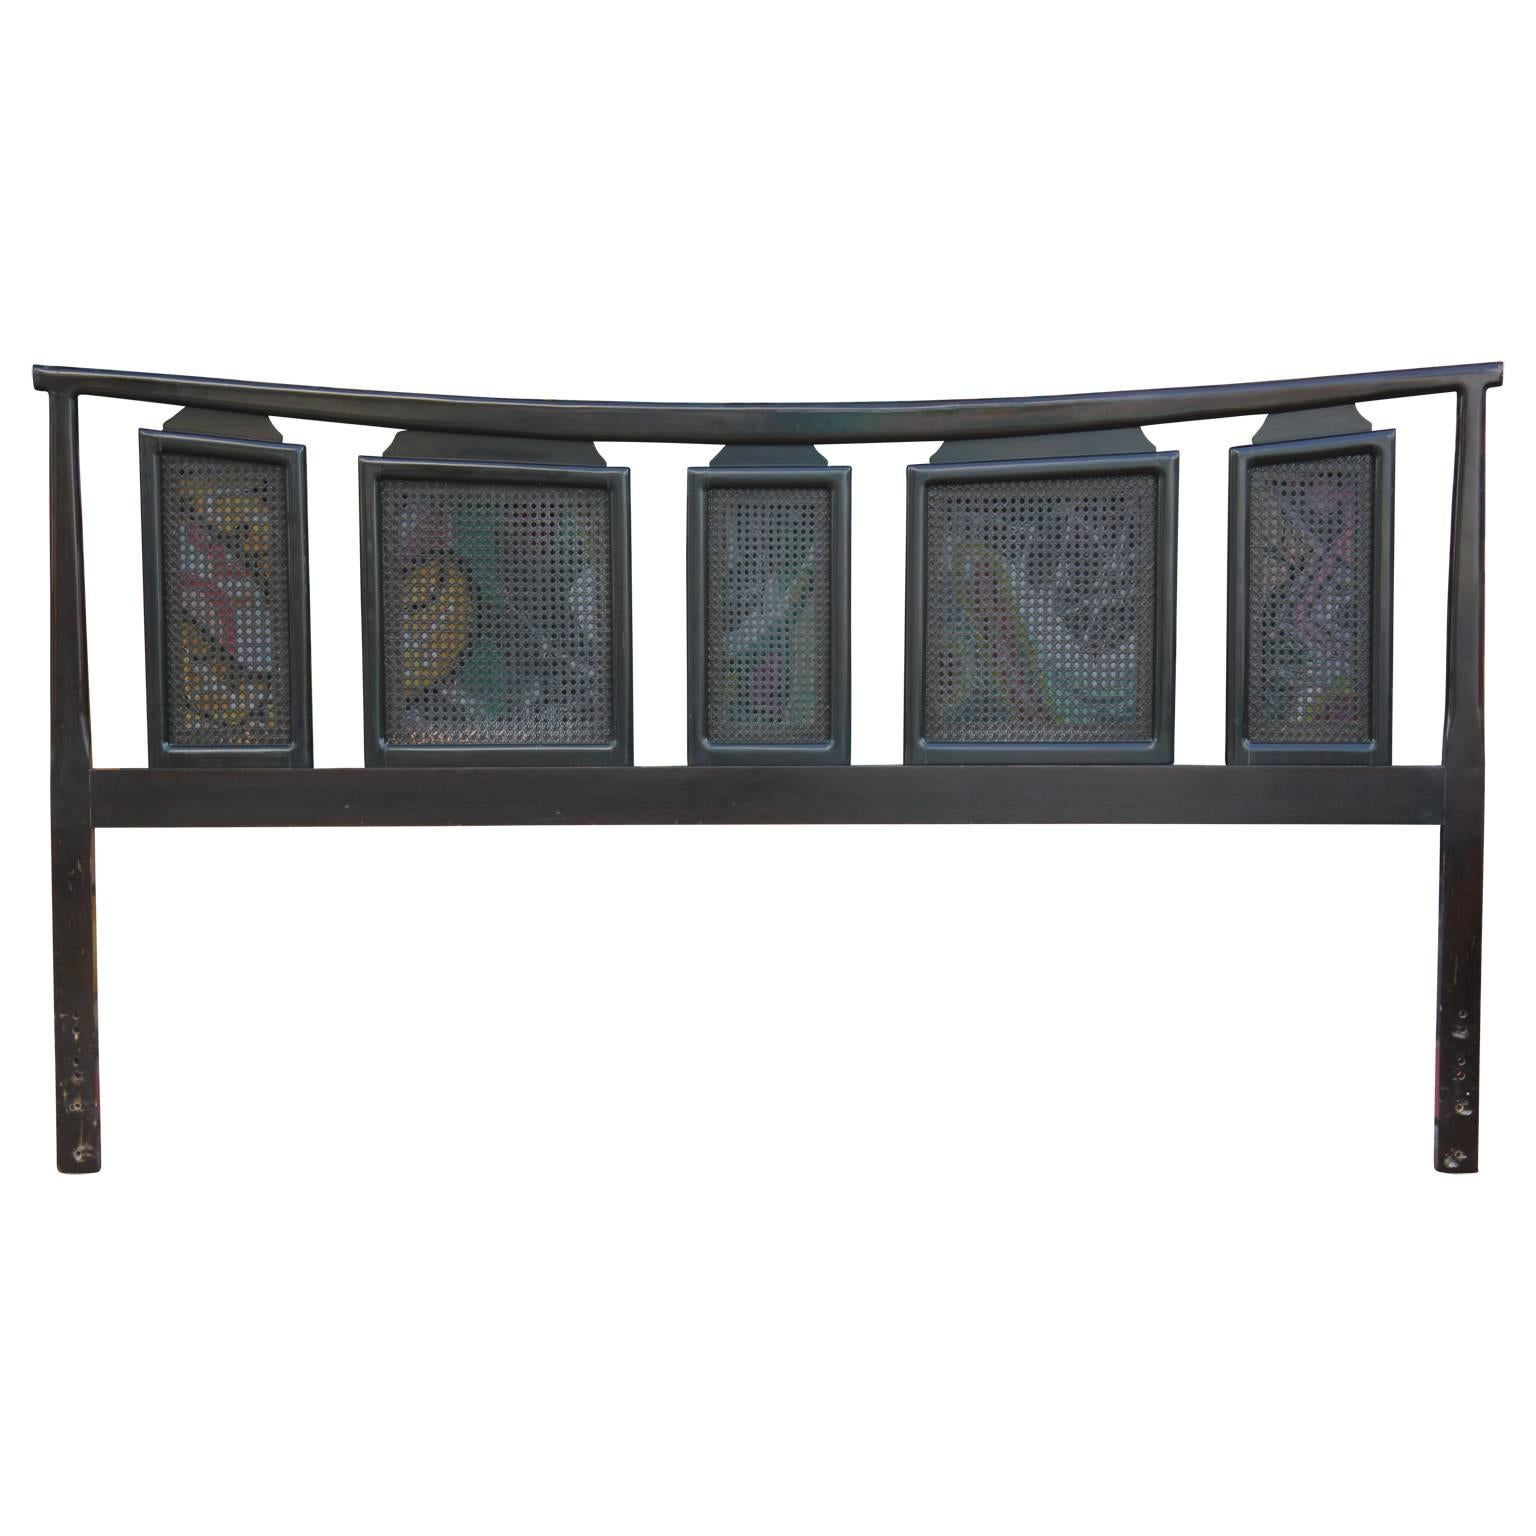 Modern 1960s king-sized dark stained headboard with five panels made of cane. 

It looks like there is a pattern behind each panel in these photos, but there is not - it is just difficult to edit everything out of this photo because of all the small